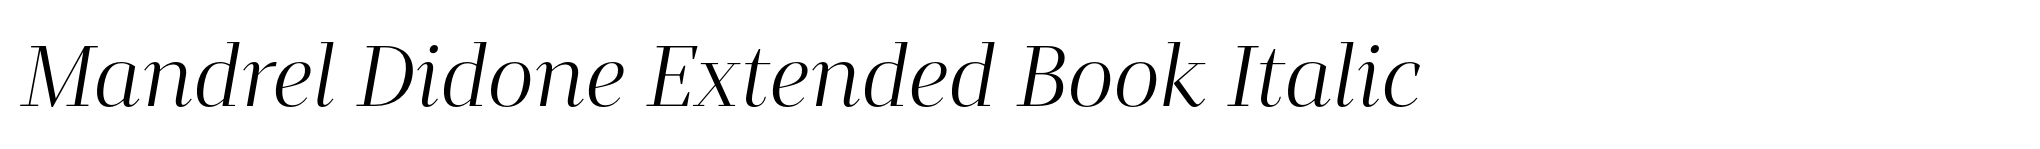 Mandrel Didone Extended Book Italic image